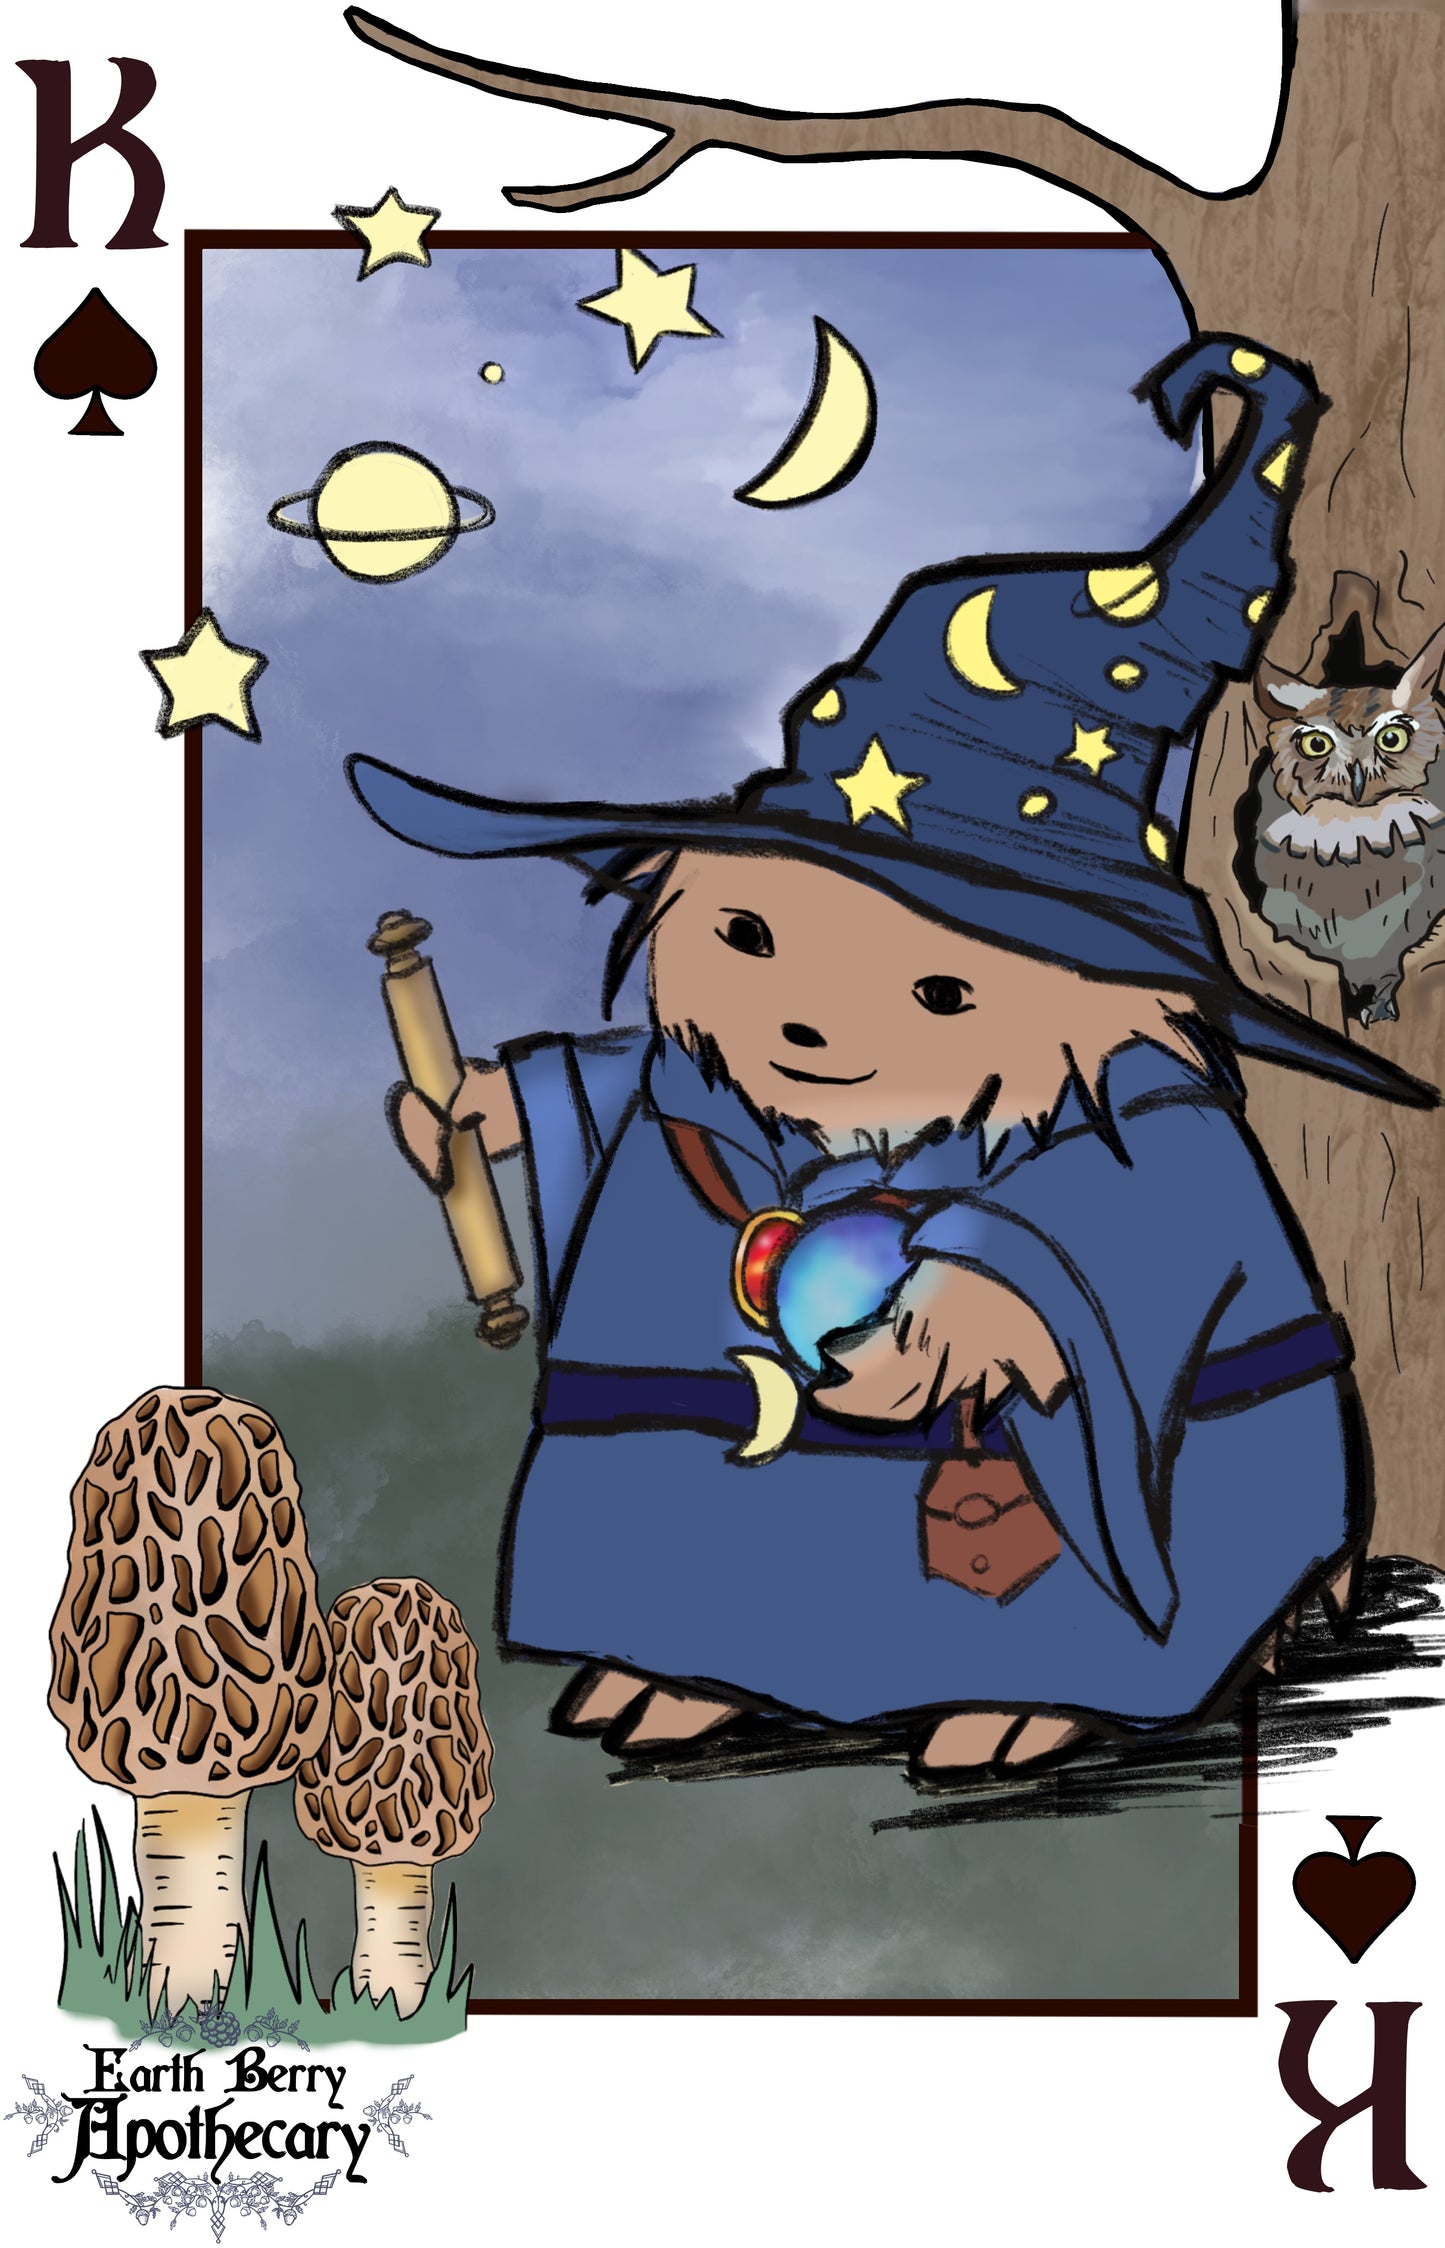 Fantasy themed playing cards. The king of spades is Merlin. He has a wizard hat with moons and stars. An owl sits in an old tree. Morel mushrooms grow in the foreground.